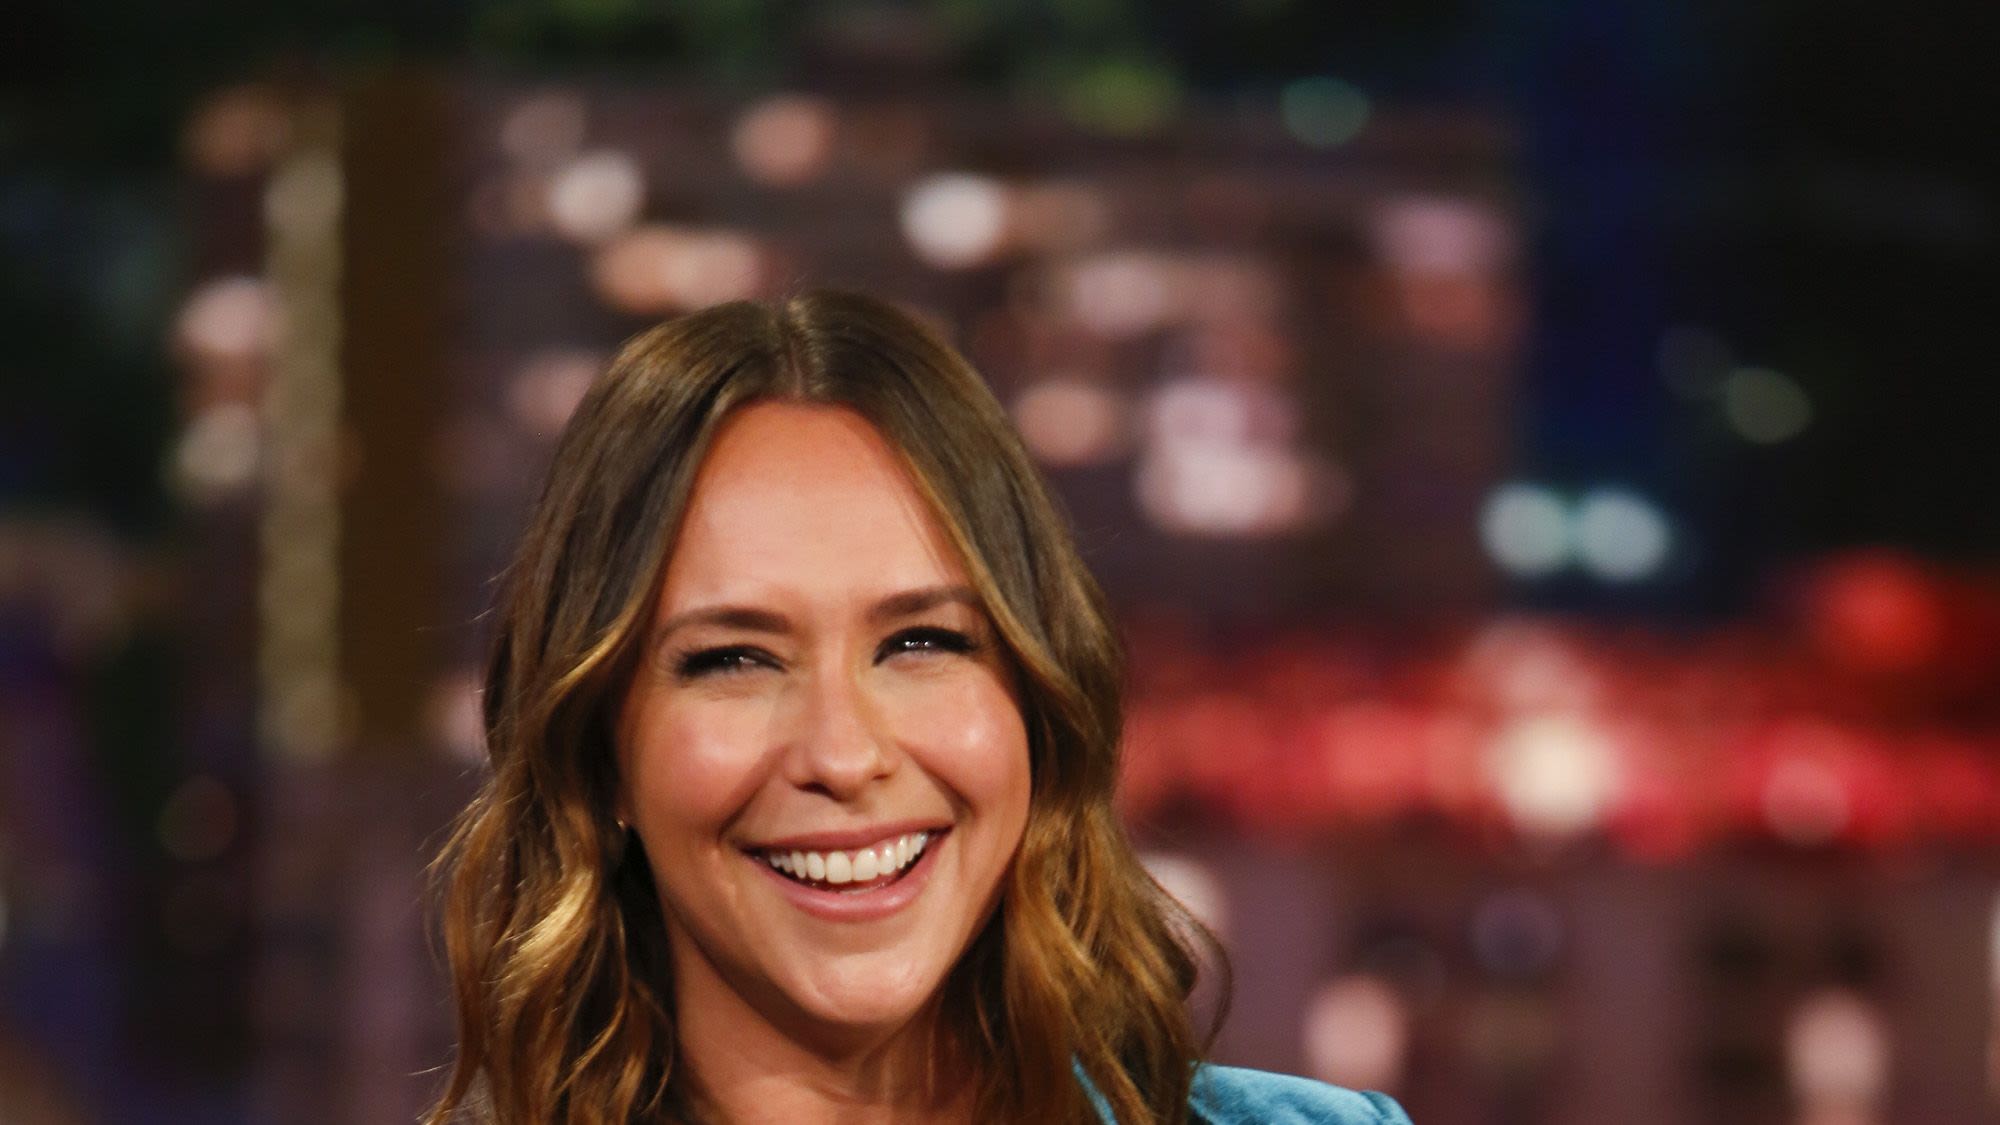 '9-1-1' Fans Have a Request for Jennifer Love Hewitt as She Drops Career News on Instagram